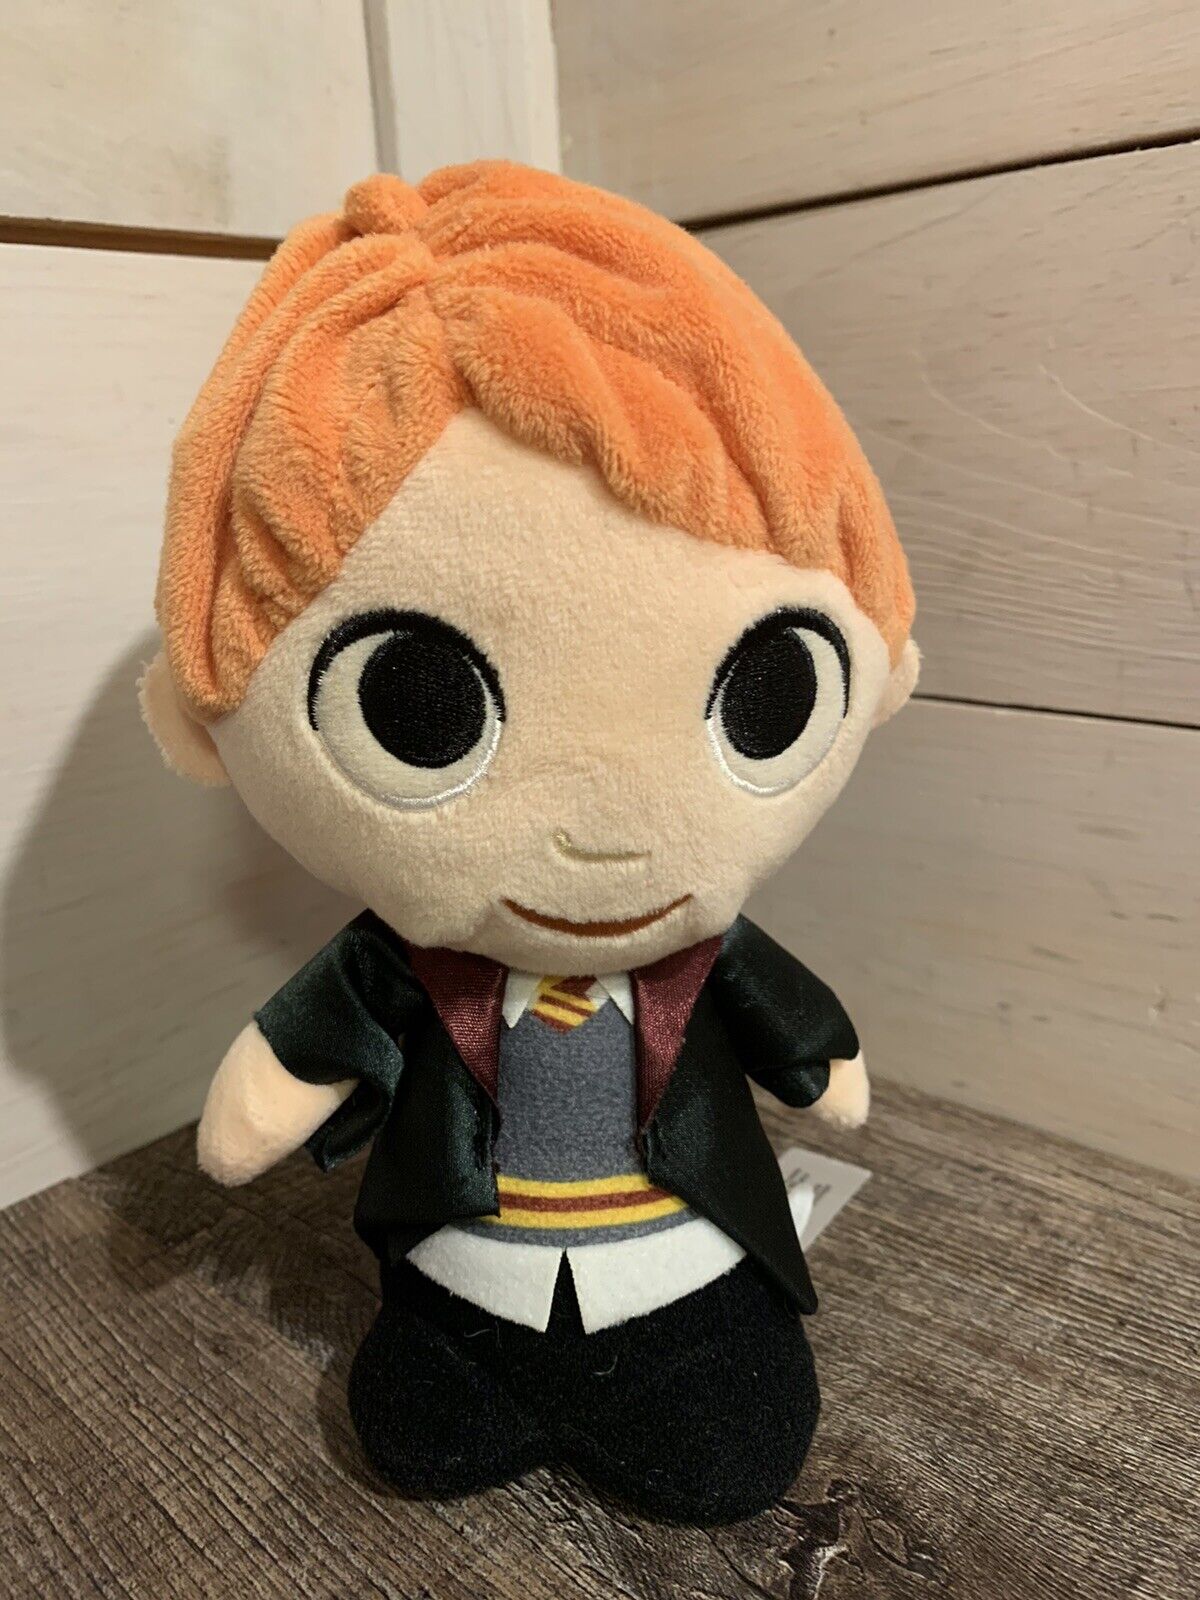 Funko Harry Potter Super Cute Plushies 8” Collectible Ron Weasley Plush Standing